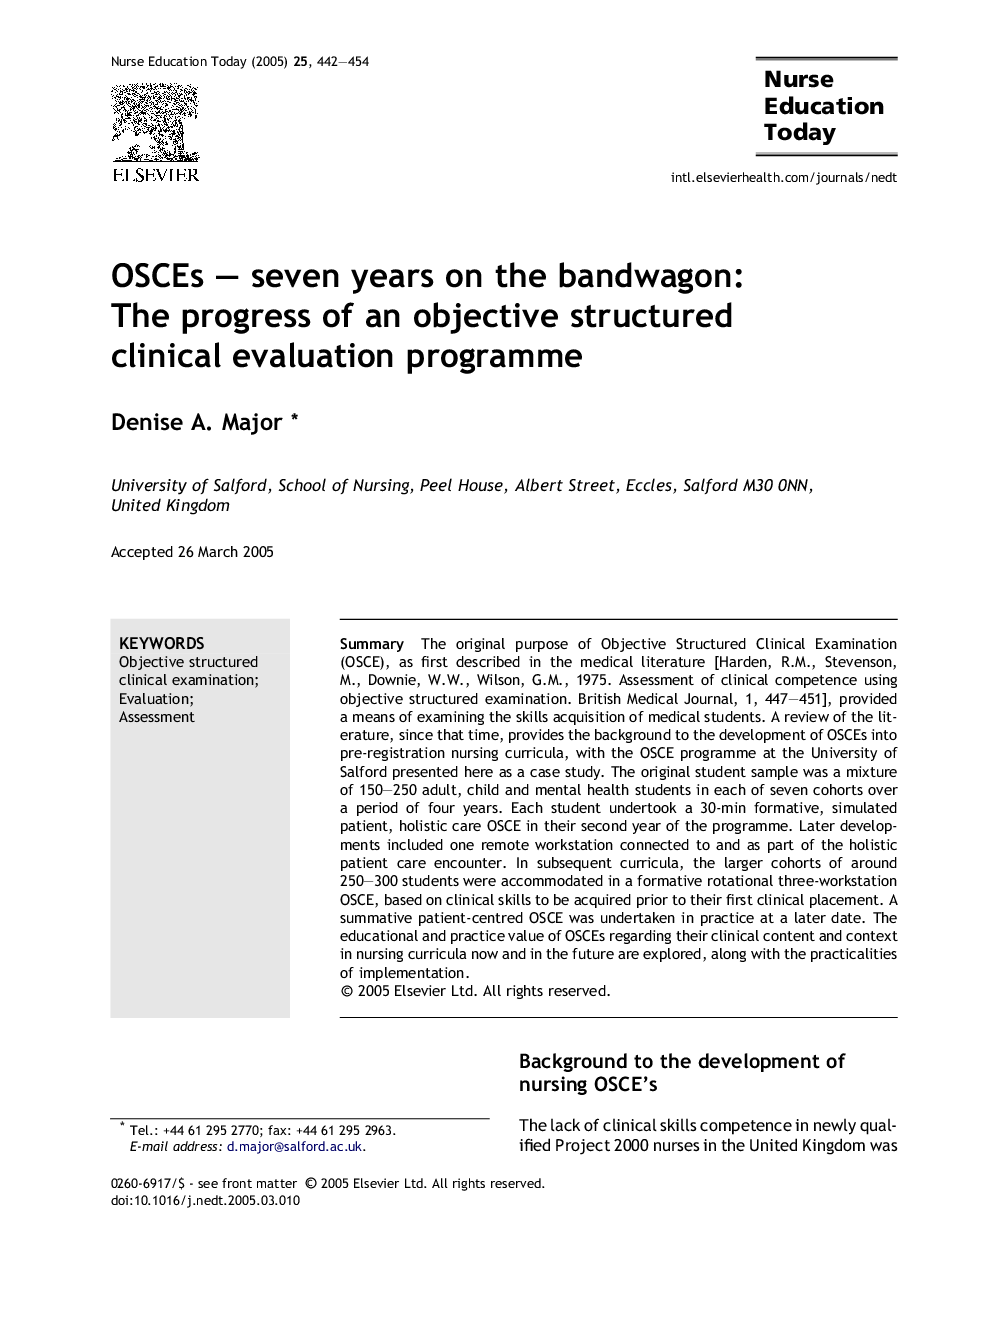 OSCEs - seven years on the bandwagon: The progress of an objective structured clinical evaluation programme